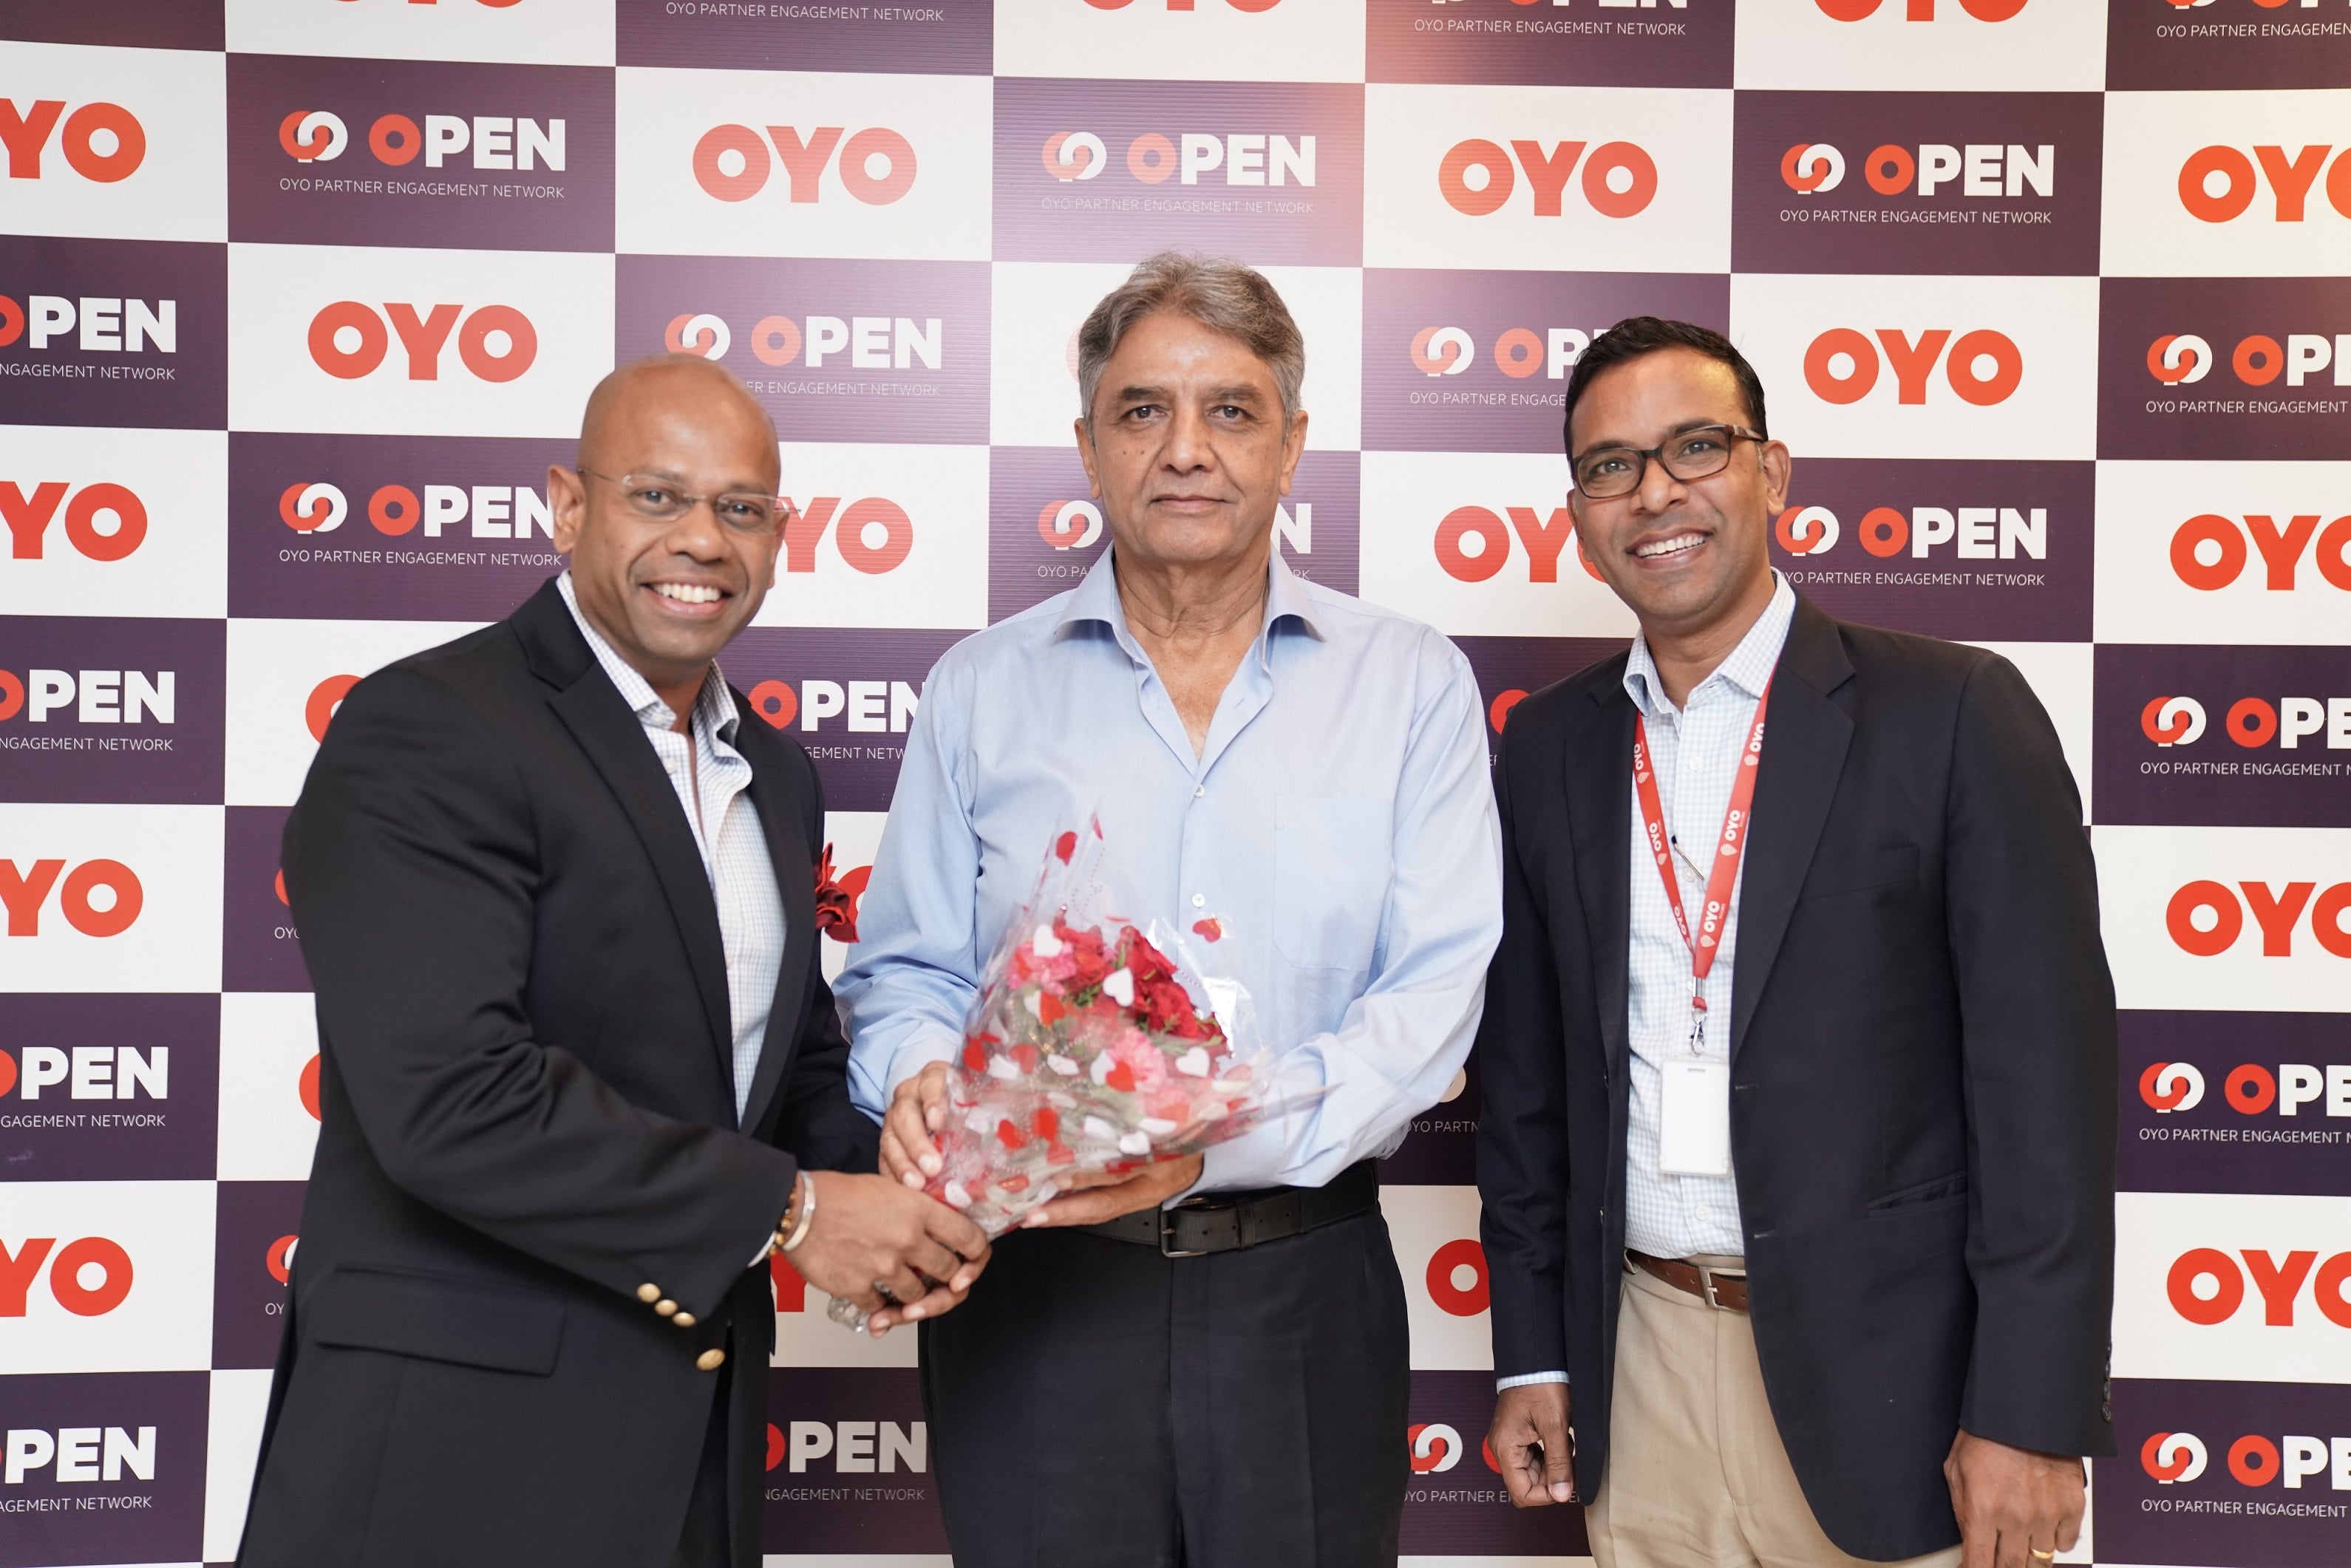 L to R - Mr. Aditya Ghosh, CEO, OYO India and South Asia; Mr. V.K.Duggal, IAS, Former Home Secy and Manipur, Mizoram Governor) and Rakesh Prusti, General Counsel, OYO-